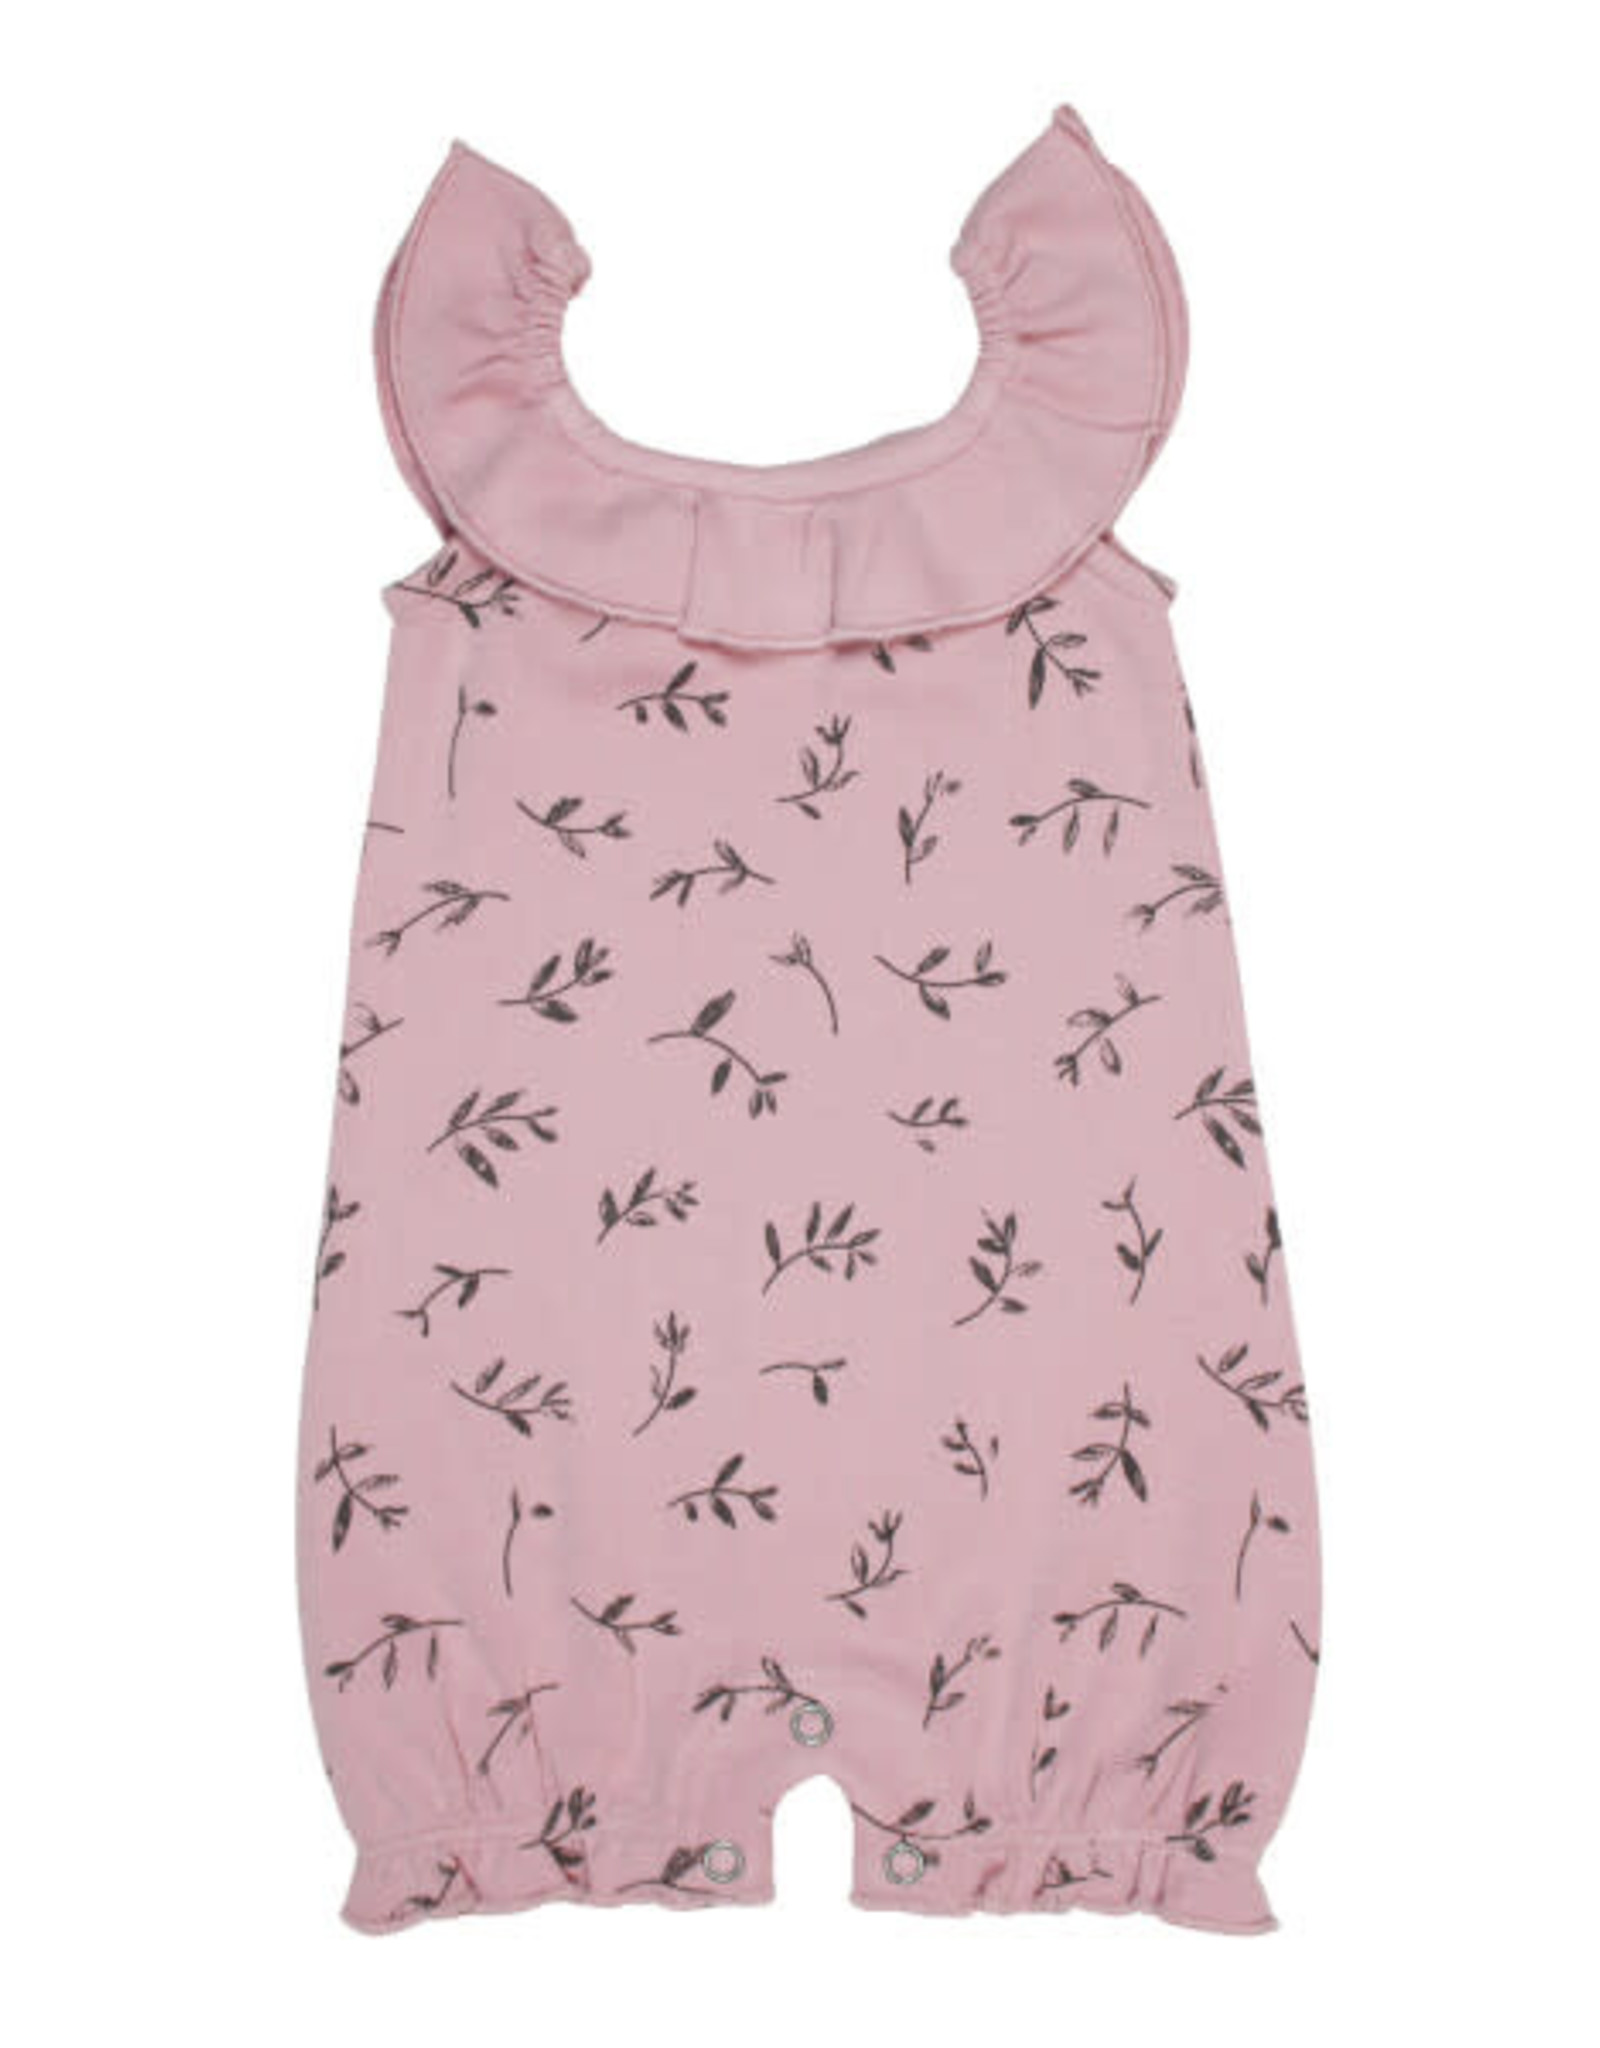 L'oved Baby Printed Bubble Romper Blossom Flower